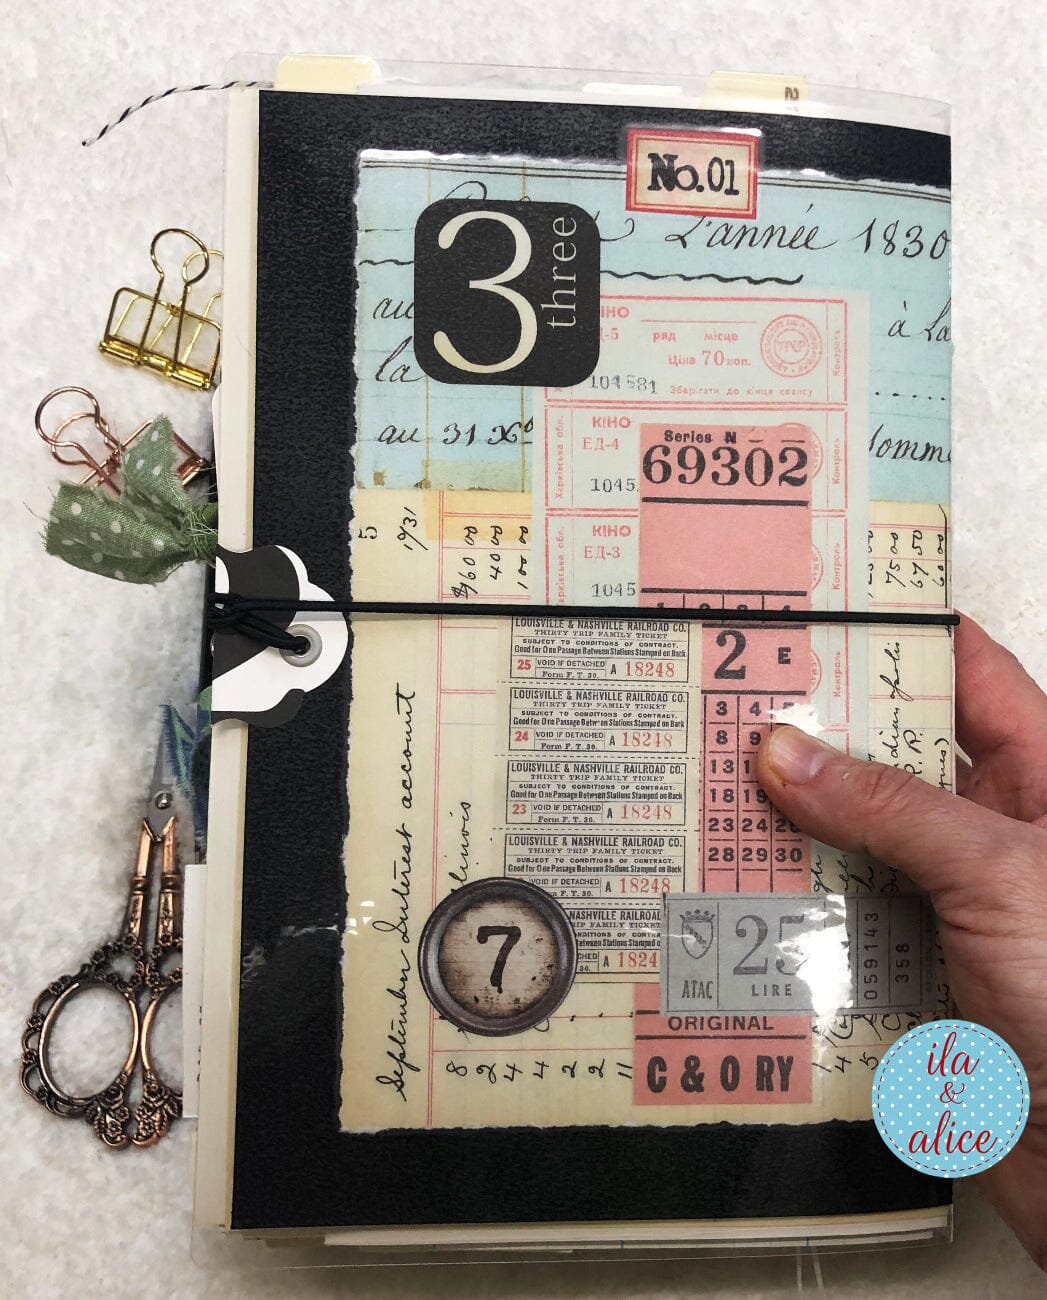 Number Themed Junk Journal with Collage Cover #1 Journal ila & alice 